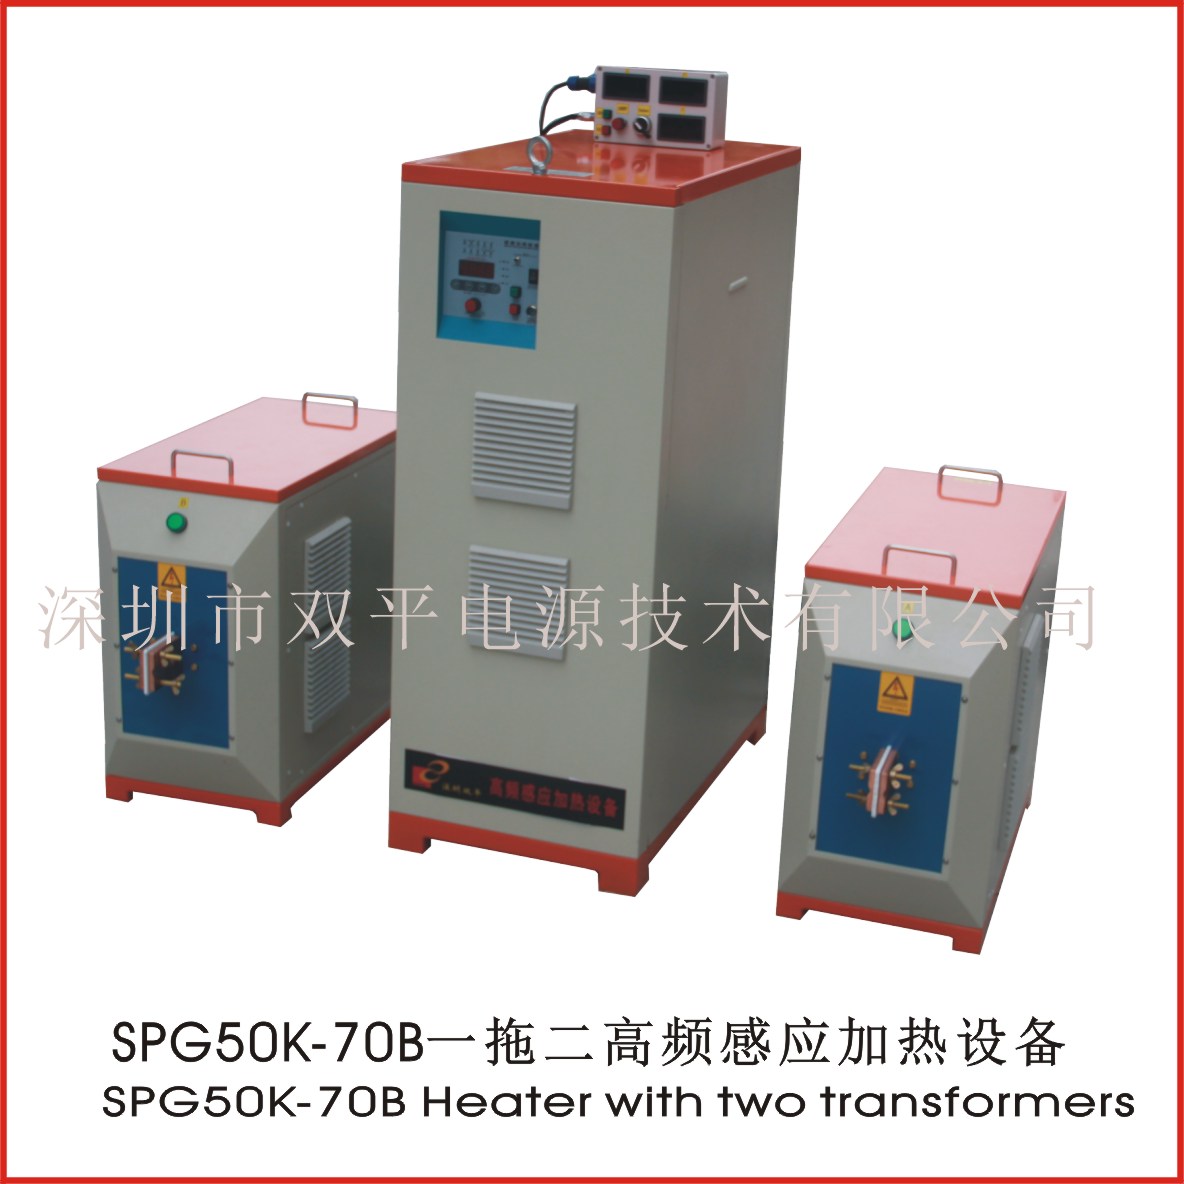 SPG50K-70B induction heater with two transformers